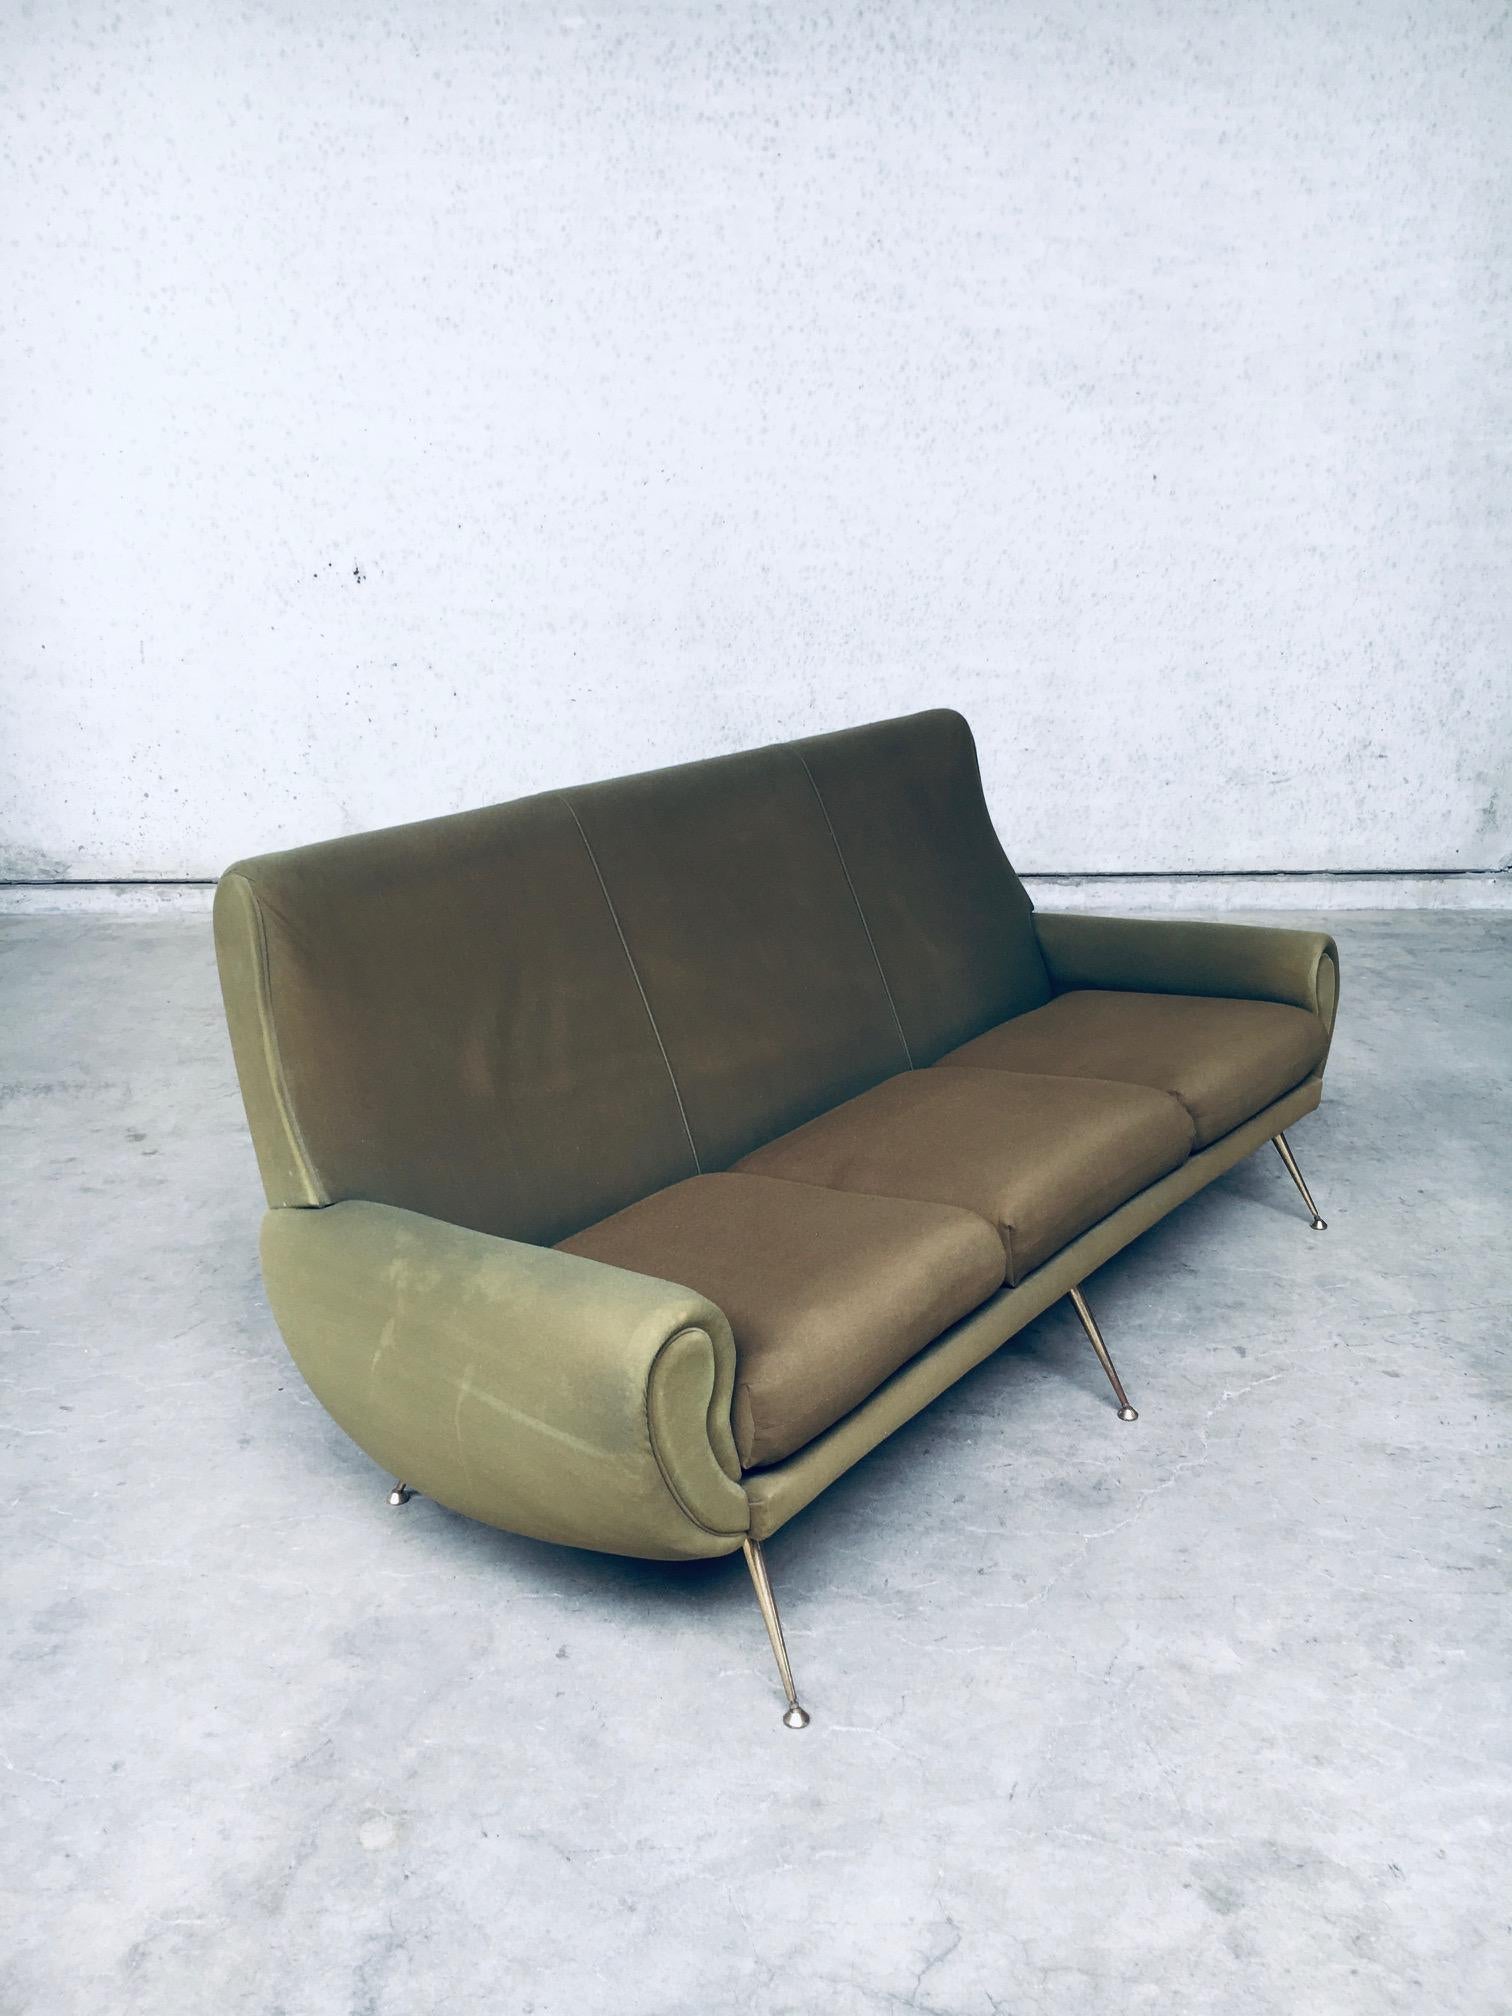 Vintage Mid-Century Modern Italian Design 3 seat sofa by Gigi Radice for Minotti, made in Italy 1950's. Soft fabric in kaki green on this well formed 3 seater sofa with brass feet. The 3 seating cushions have been reupholstered with modern fabric in